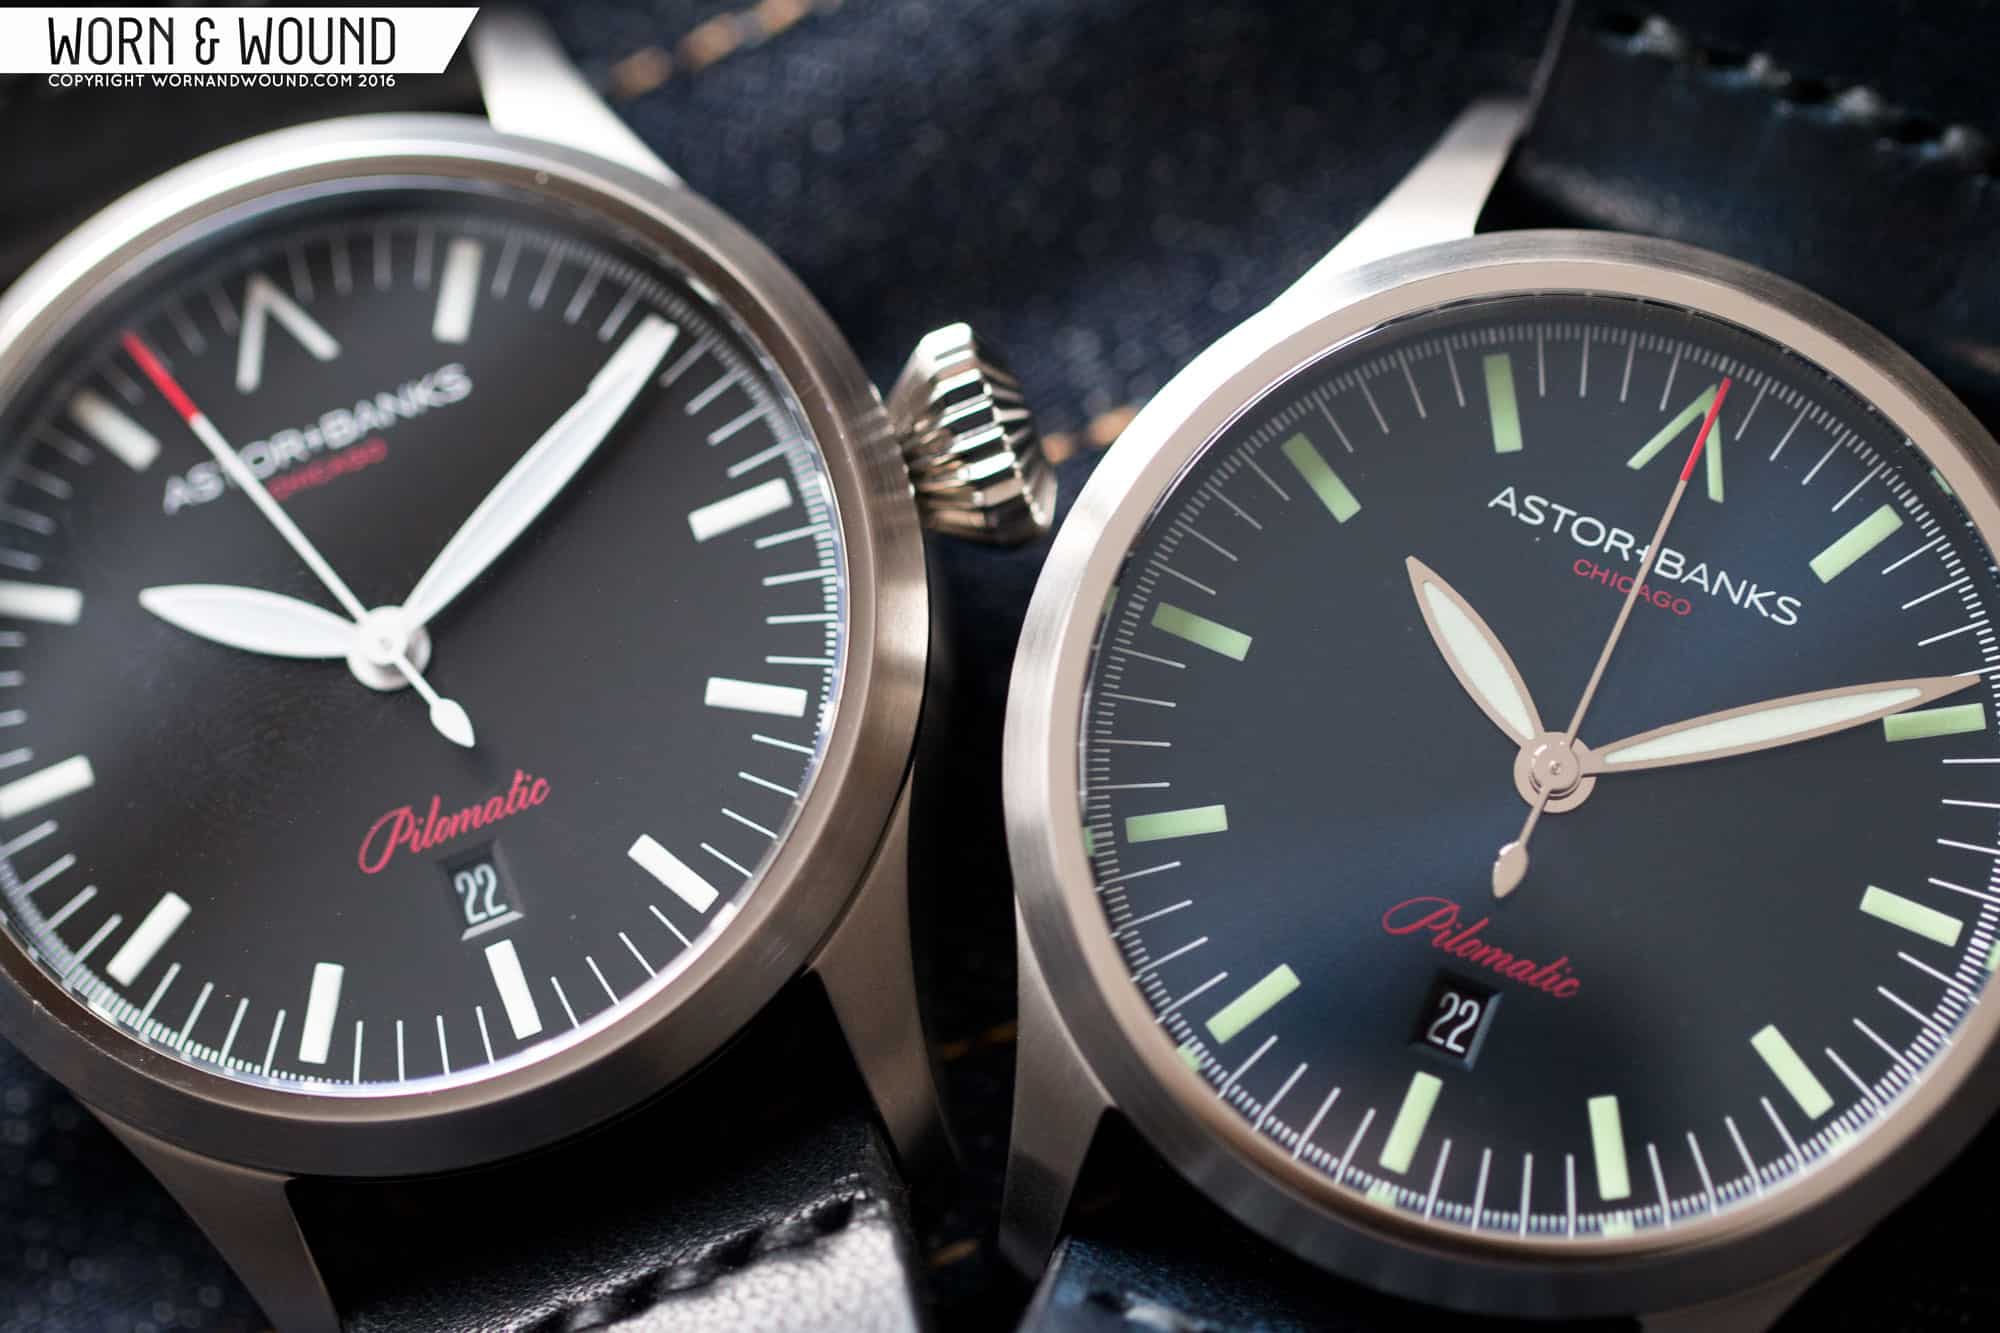 A Look at the Astor + Banks Pilomatic - Worn & Wound